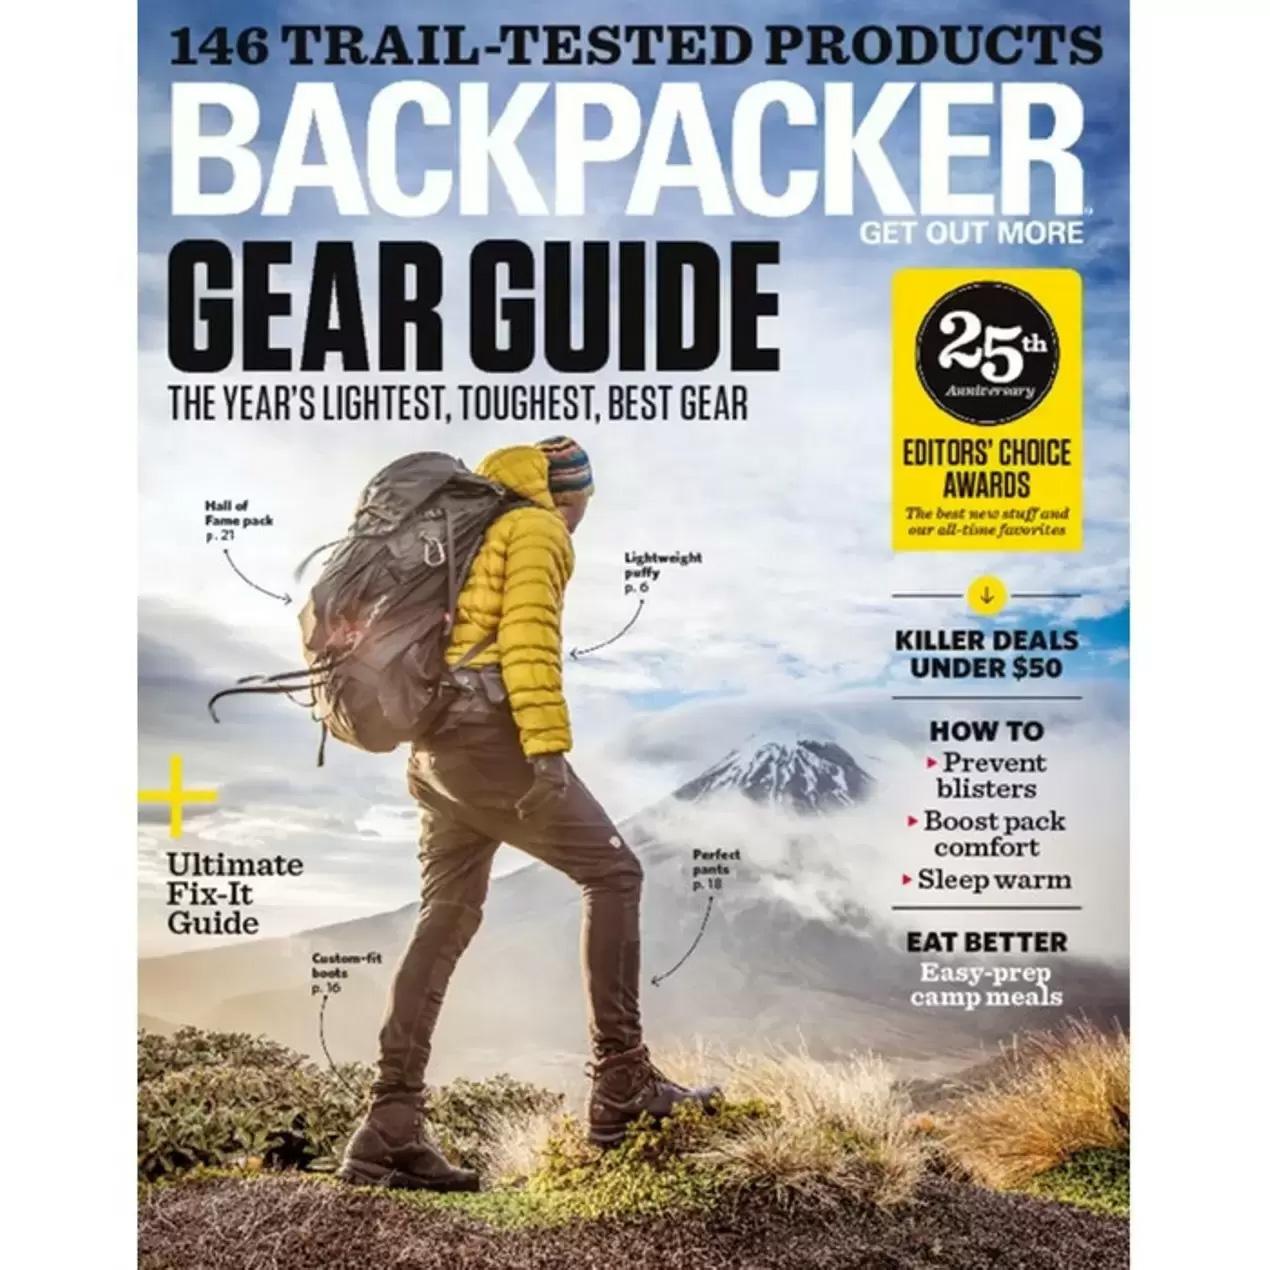 Backpacker Magazine Year Subscription for $4.00